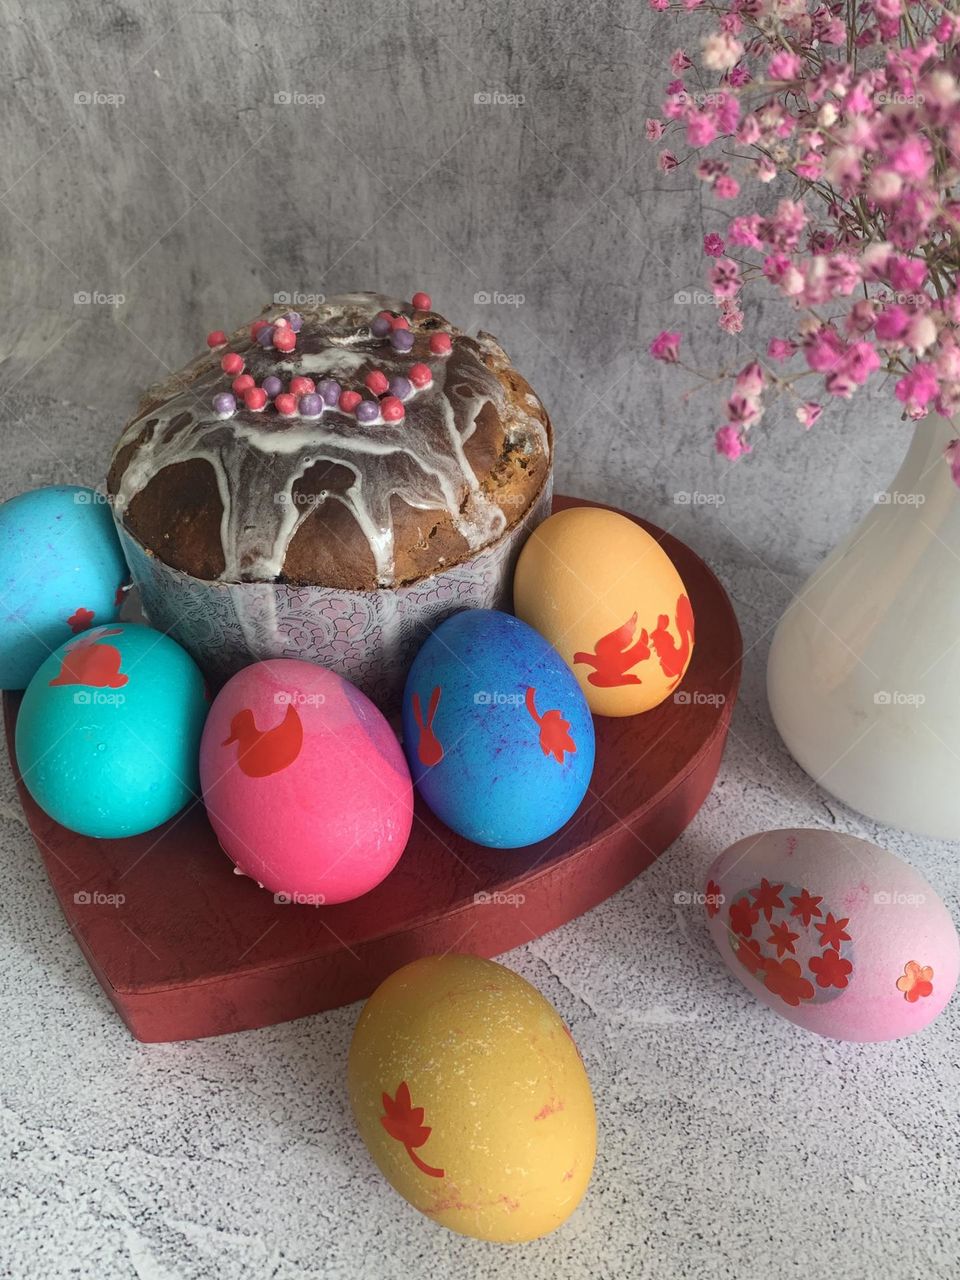 mobile food photo, easter egg and cupcake composition